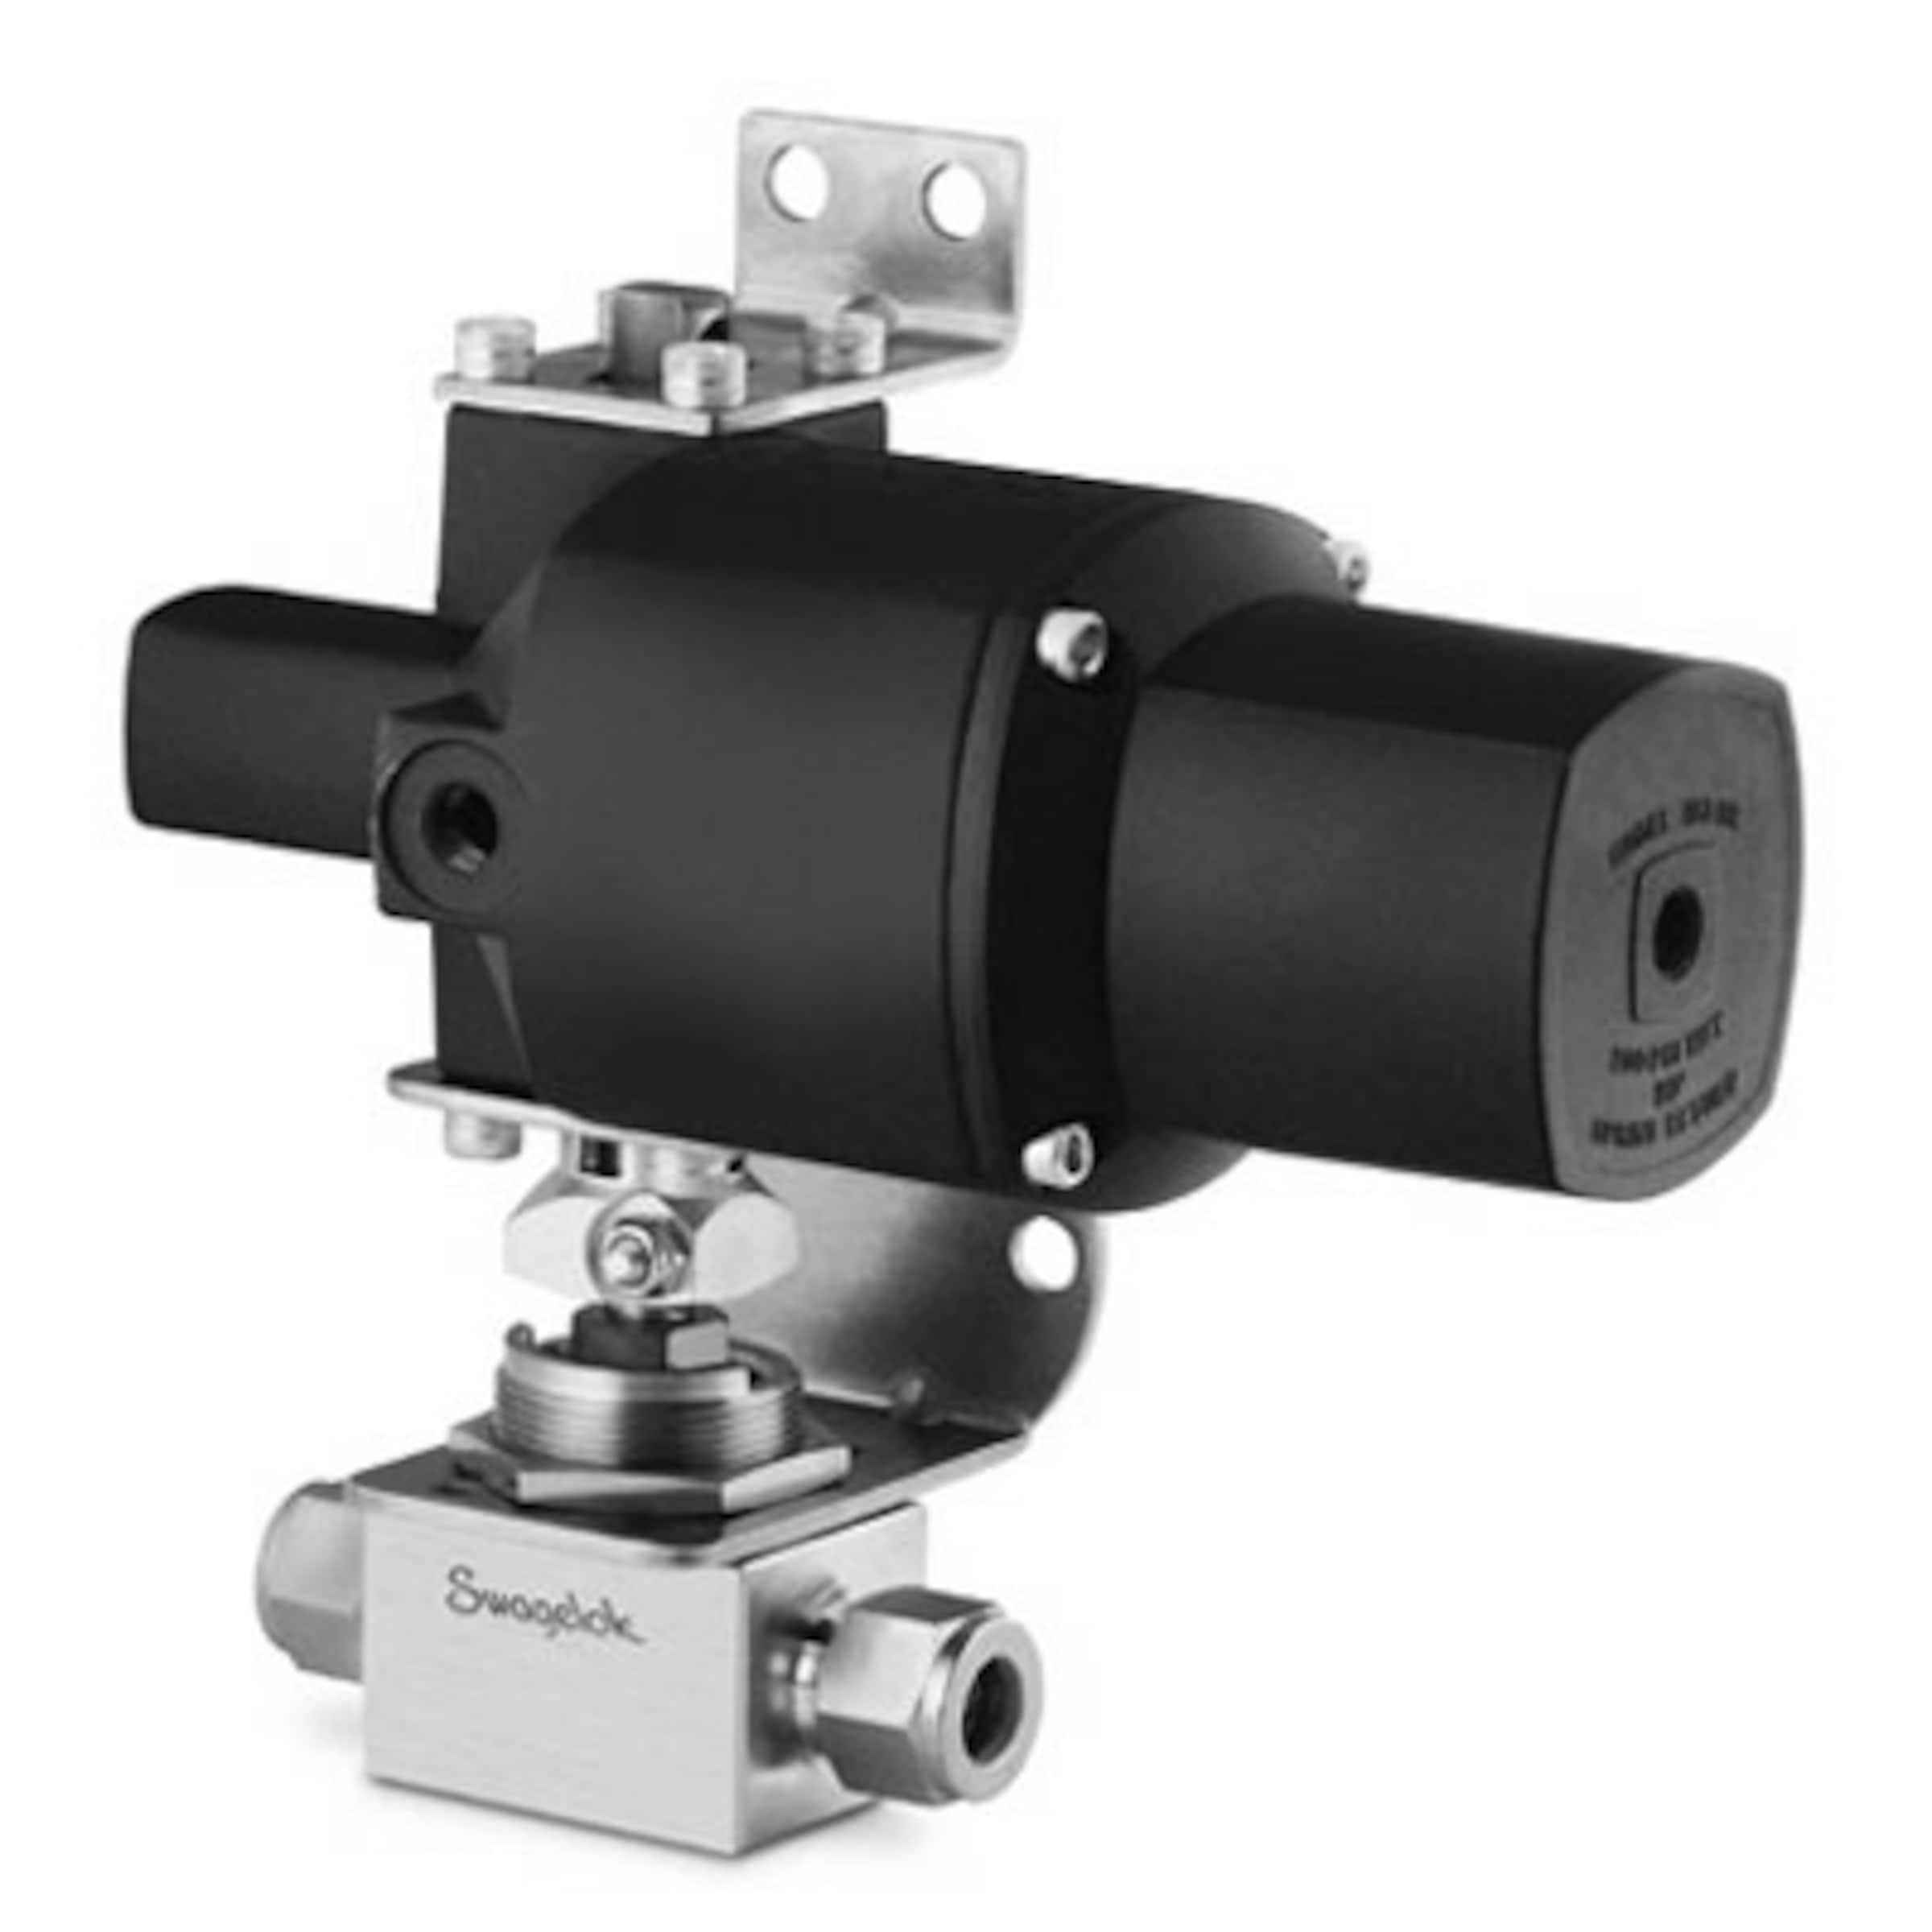 Swagelok “Whitey” SS-43TVS4 Ball Valve 2 Way with Vent, 500 psi 1/4“ Tube OD Compression Stainless Steel 